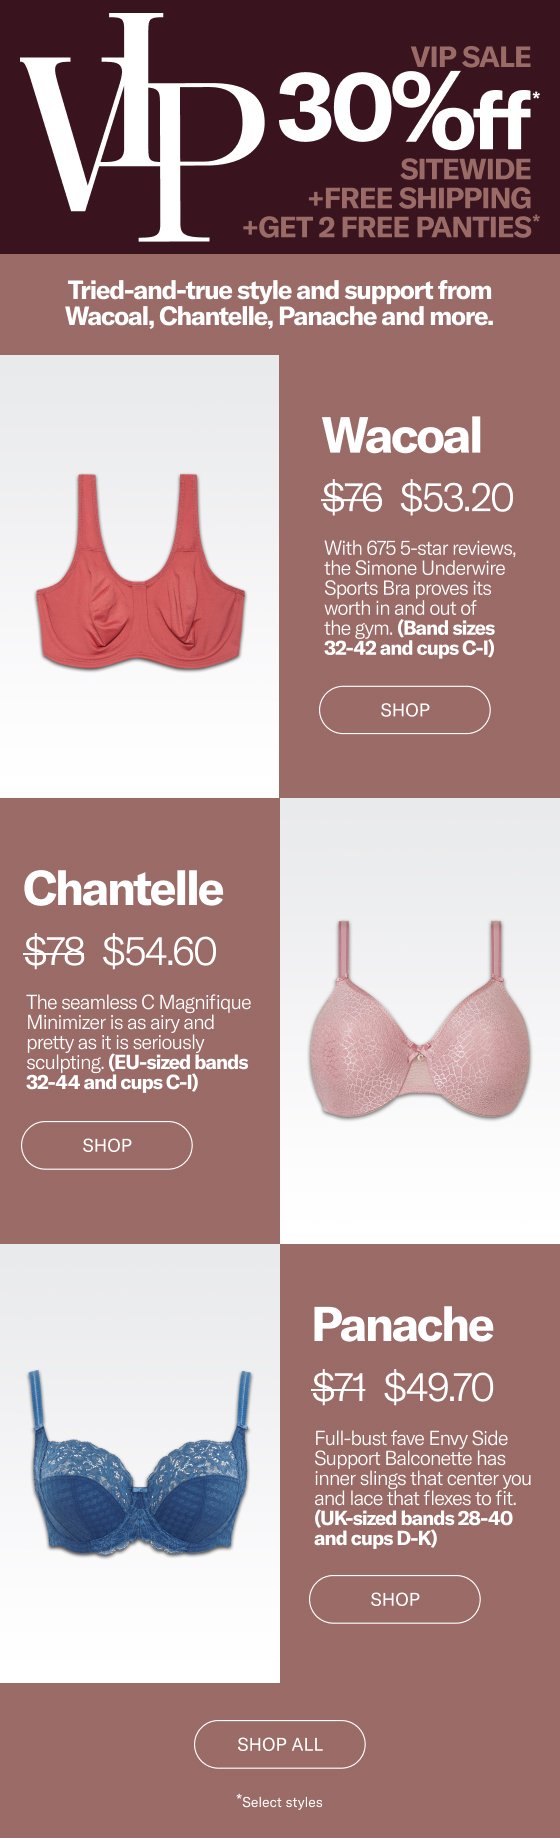 Curve Alert! 30% Off Bras Up To A K-Cup + Free Shipping - Bare Necessities